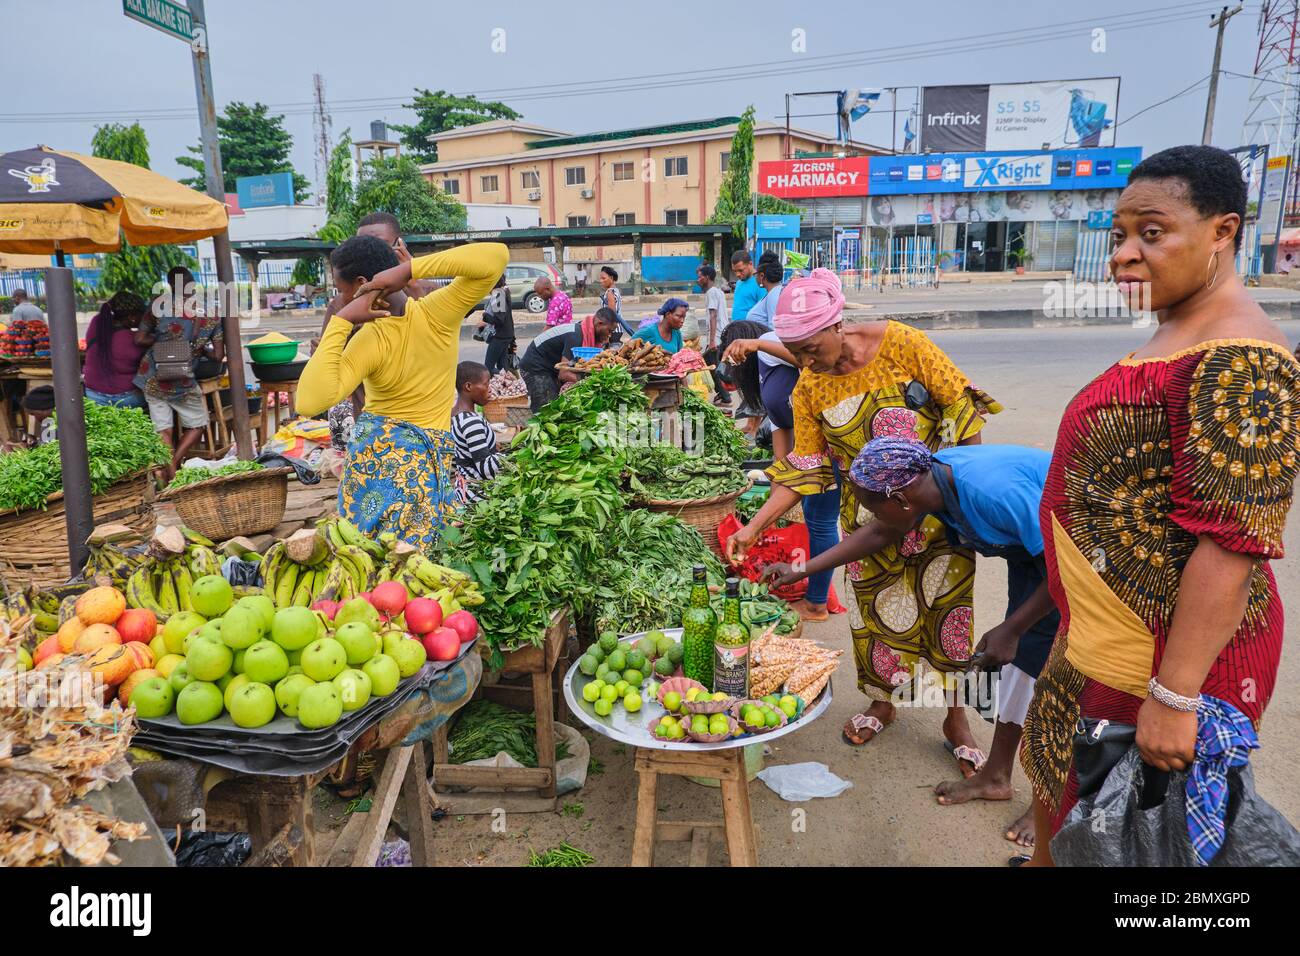 People shopping at an open air market in Lagos, Nigeria. Stock Photo